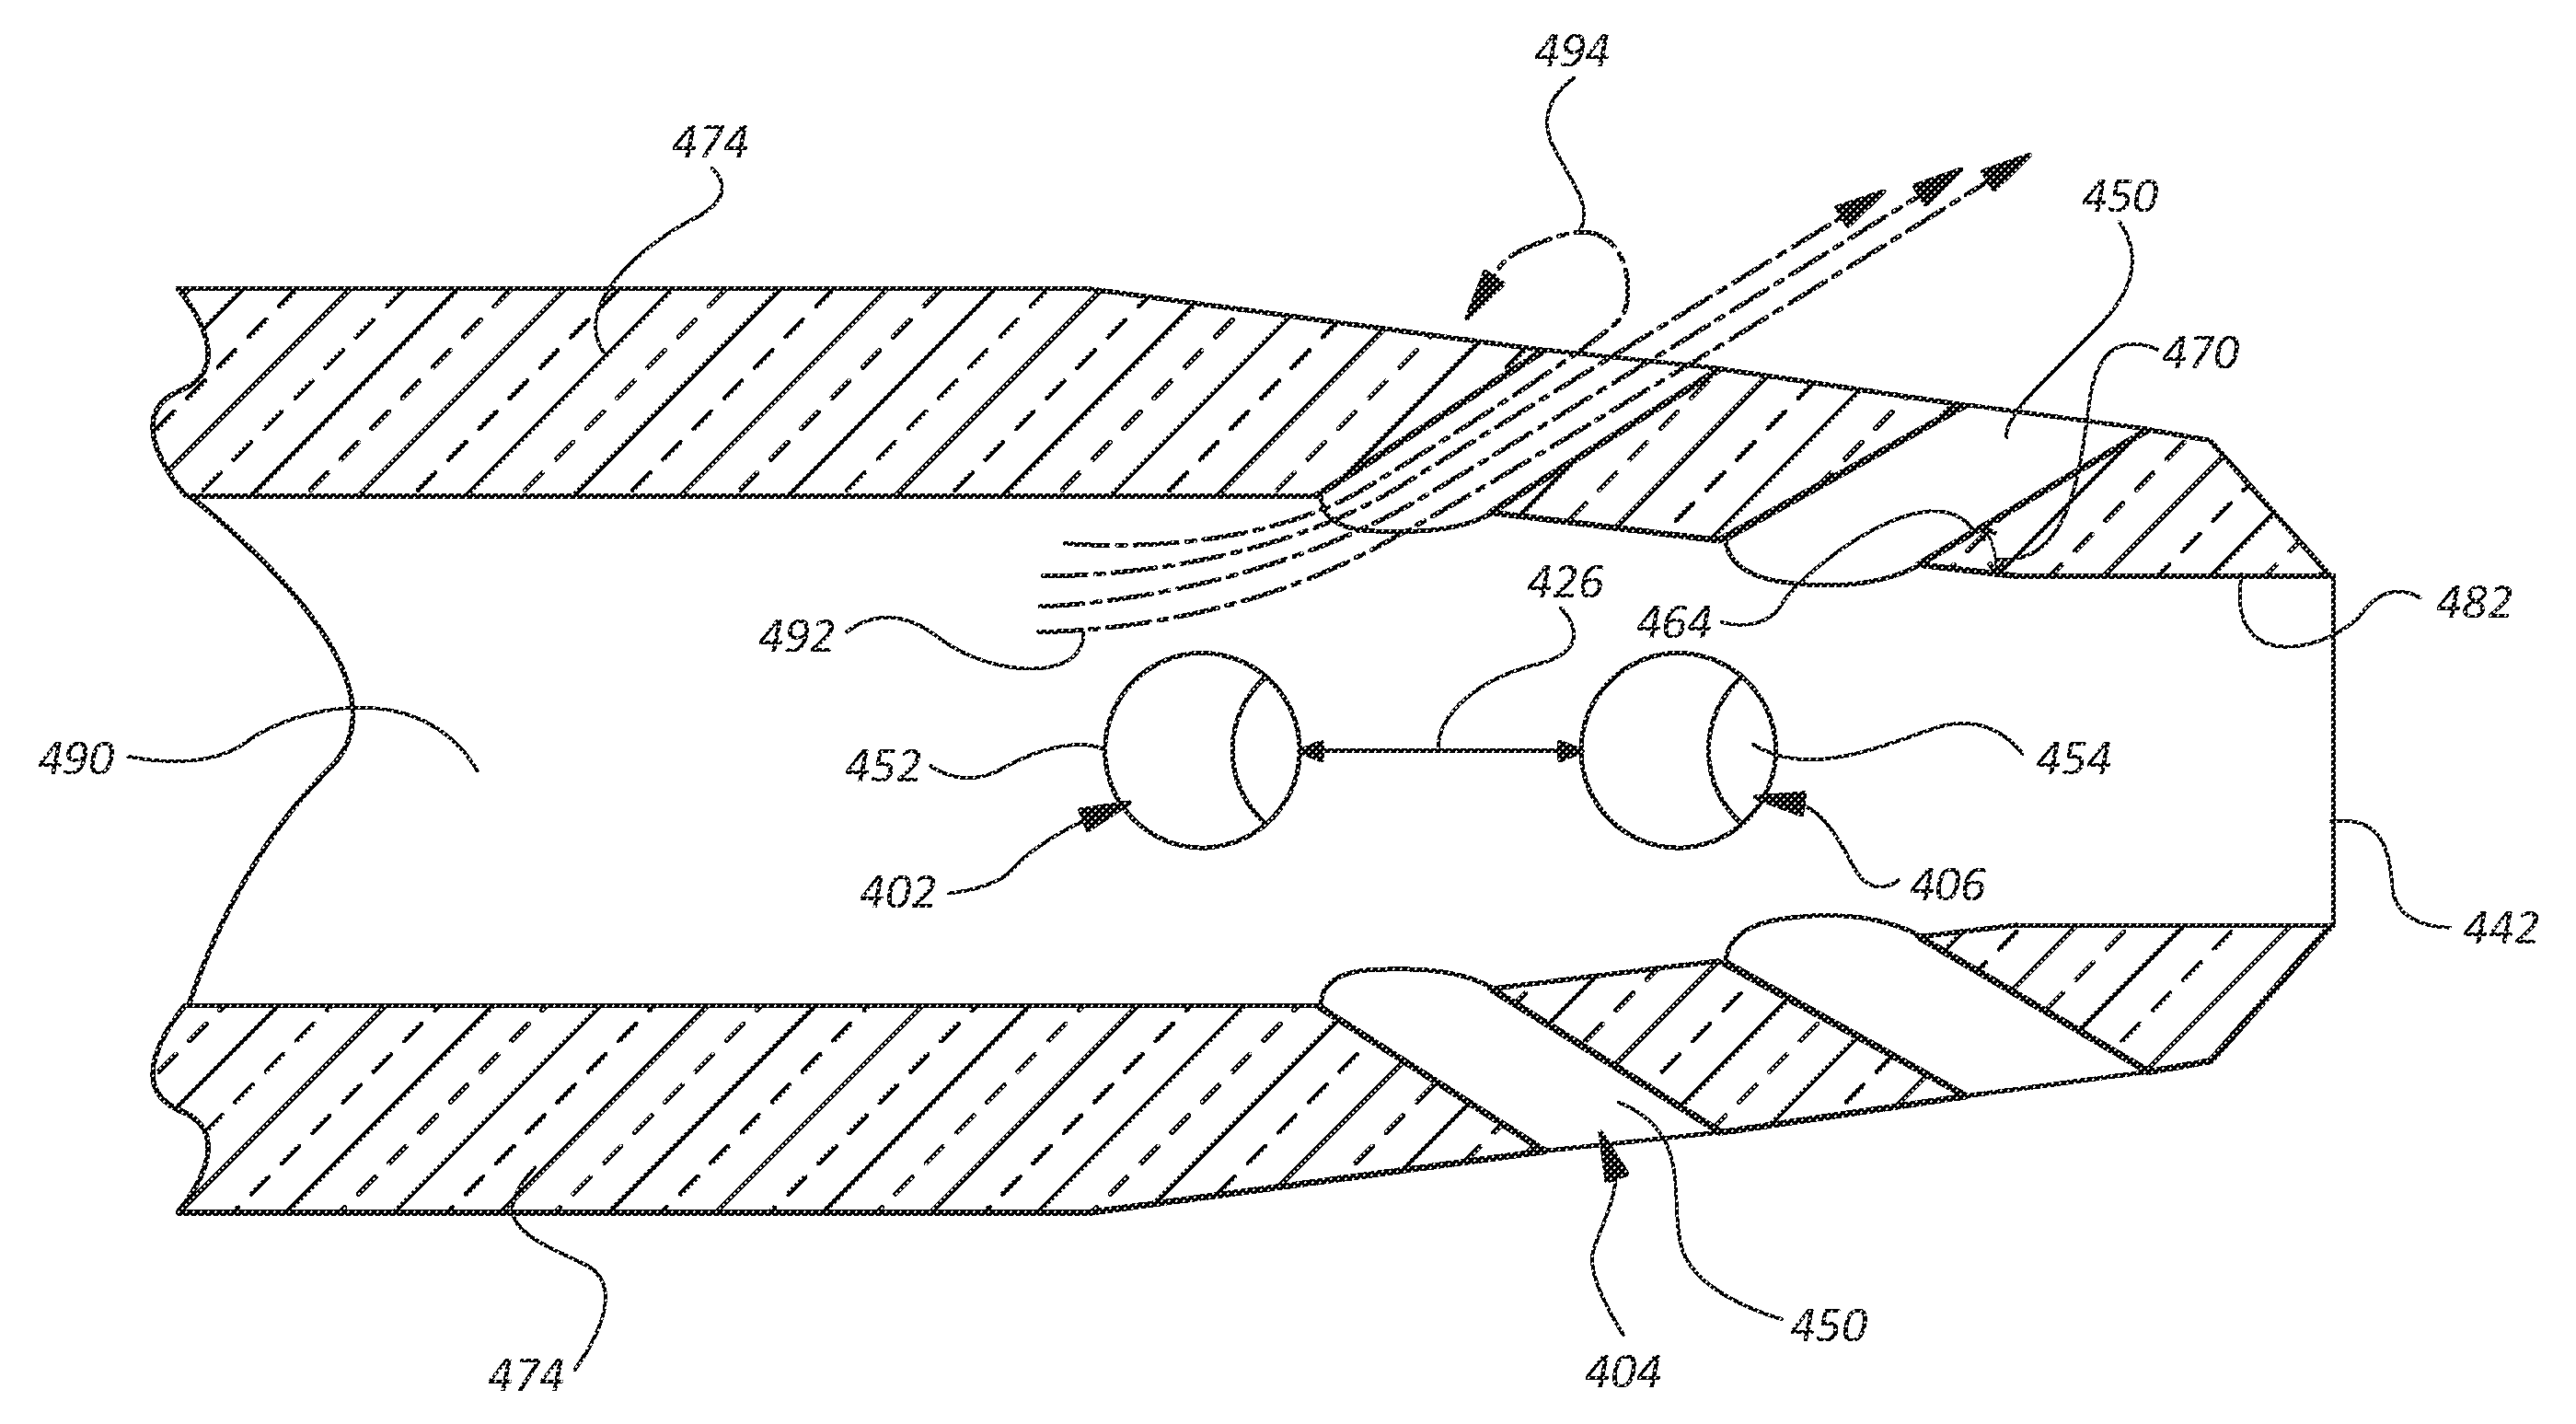 Systems and methods for improving catheter hole array efficiency